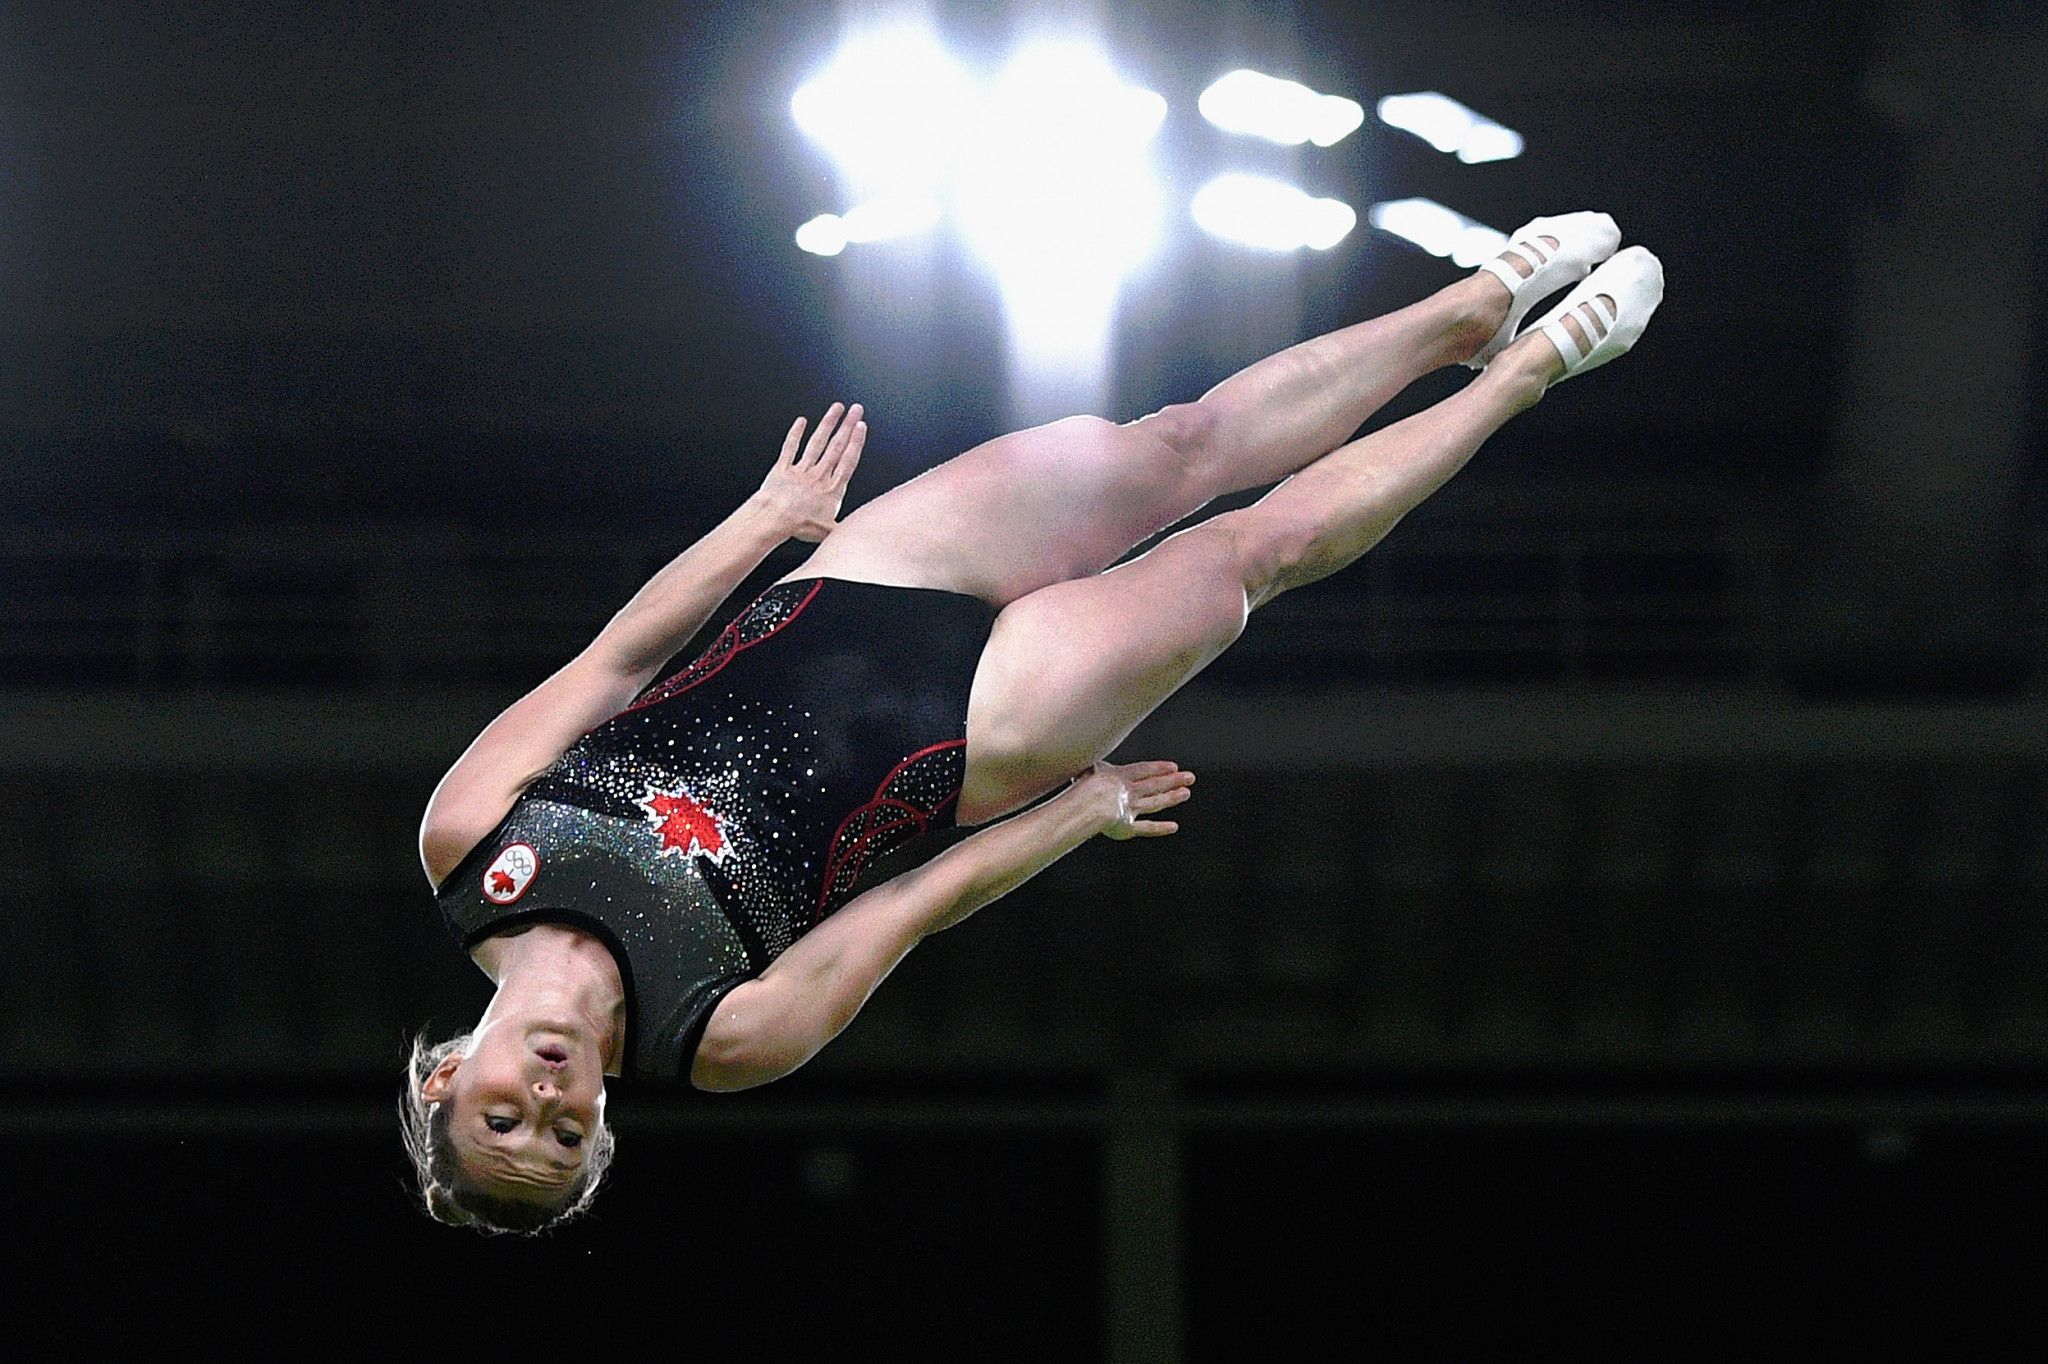 Canada's double Olympic gold medallist Rosannagh MacLennan will be competing in the women's event at the FIG Trampoline World Cup in Minsk ©Getty Images